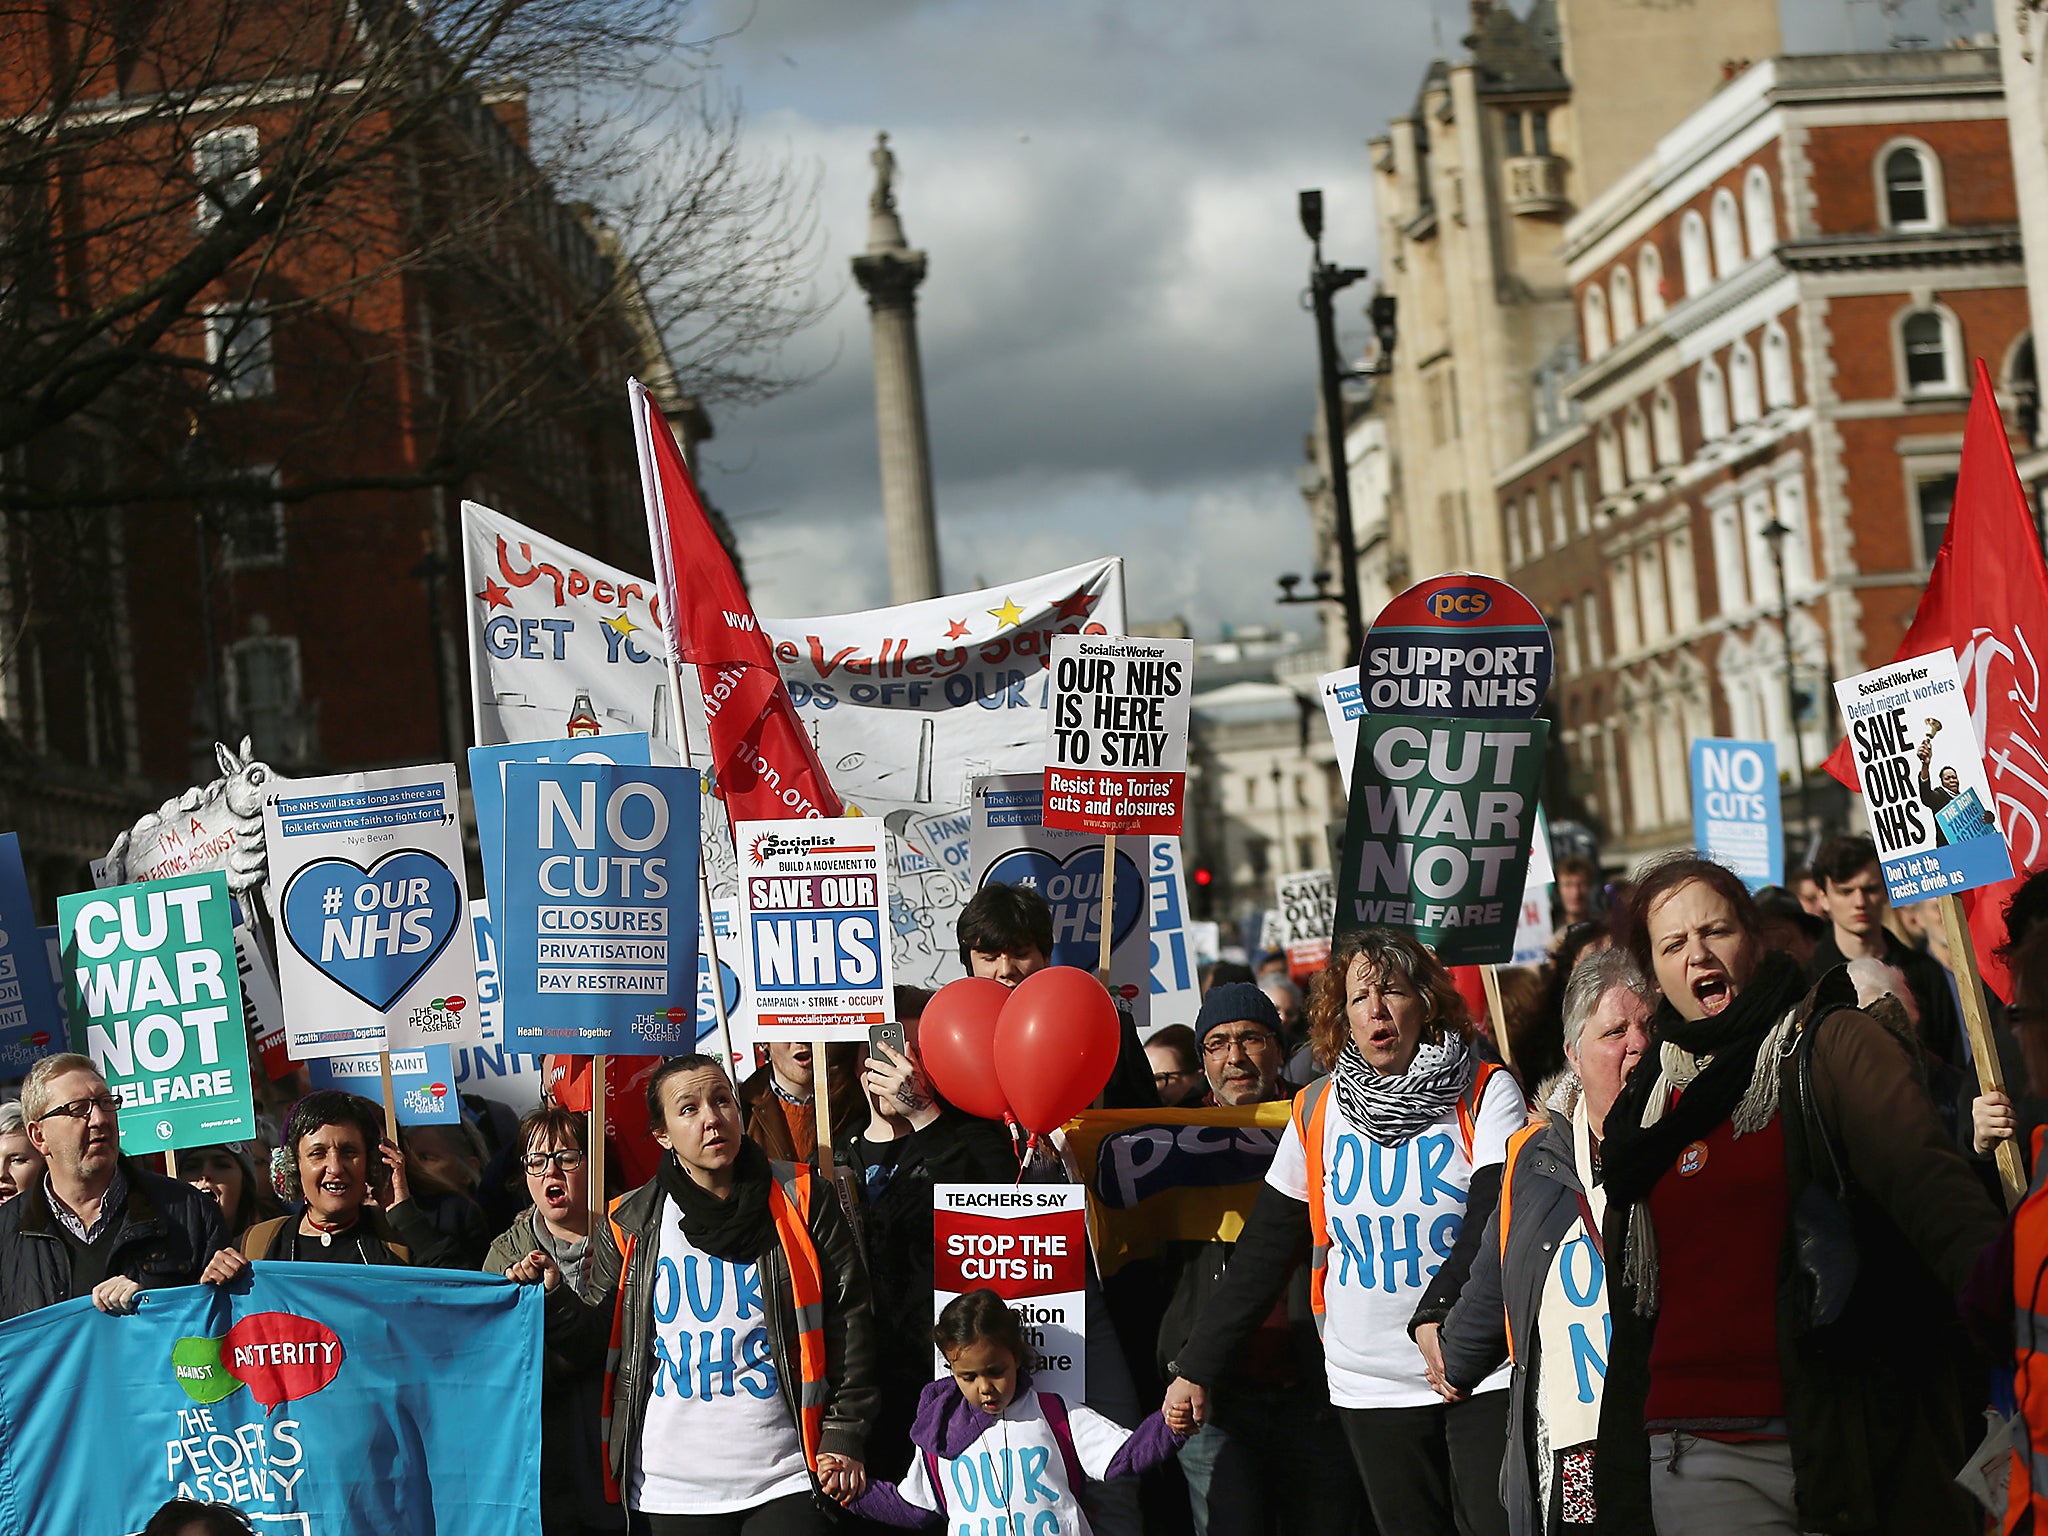 Demonstrators on the thousands-strong march to protest NHS cuts and privatisation